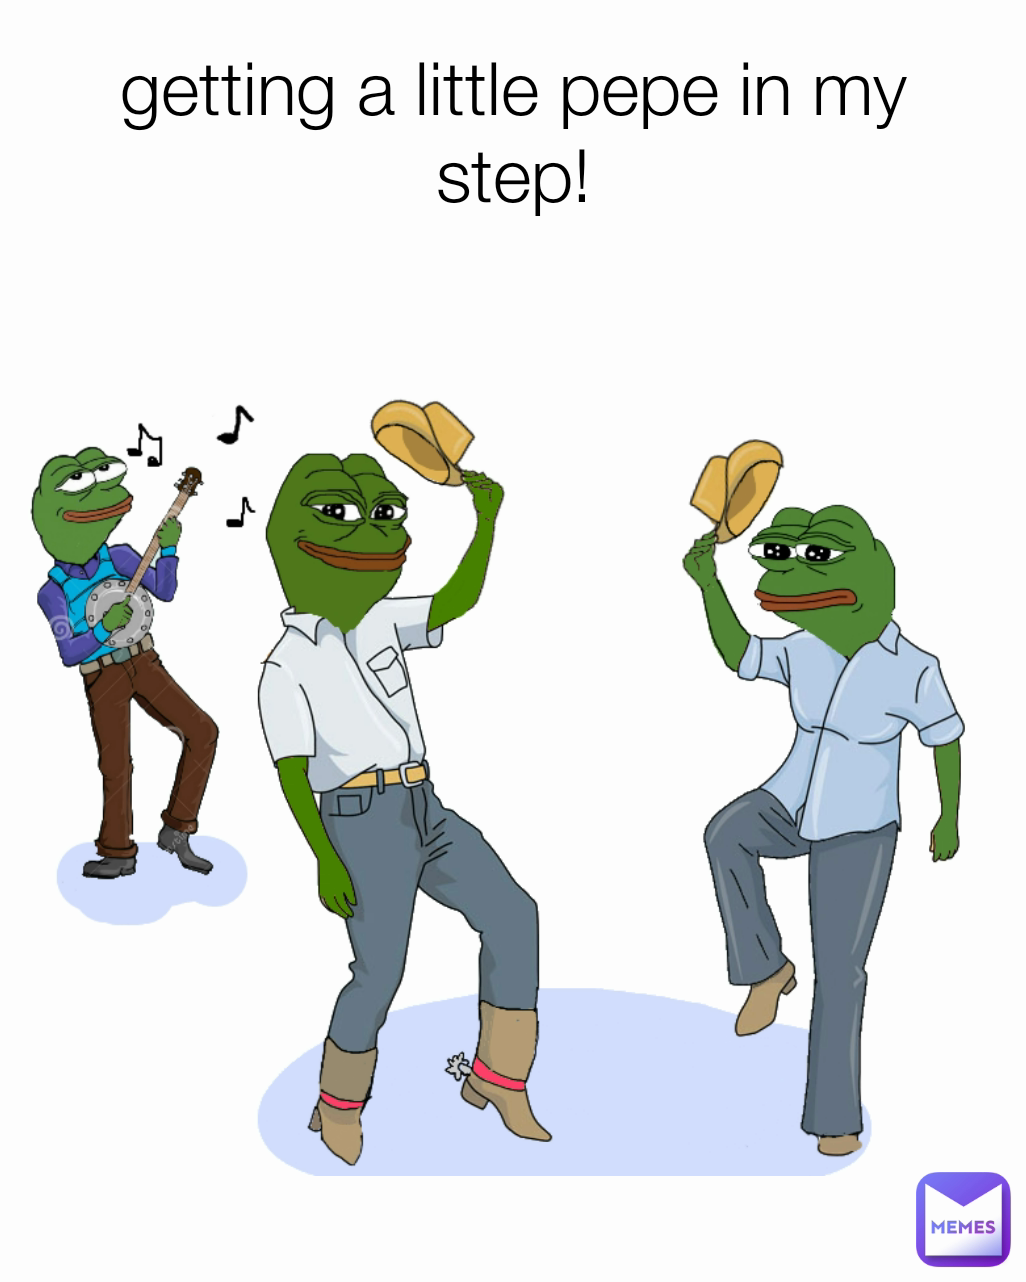 getting a little pepe in my step!